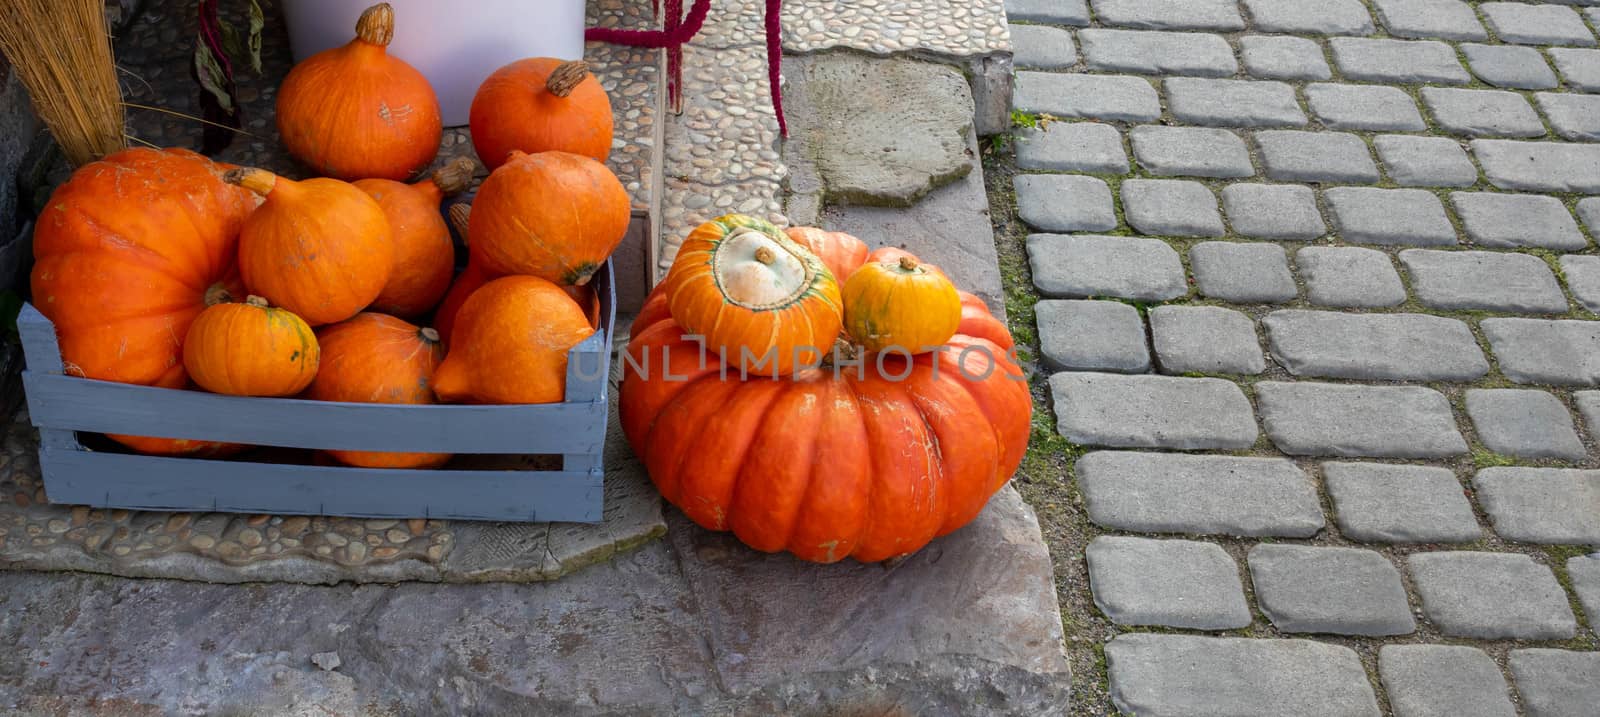 Orange pumpkins of various sizes lie on the porch of the house.The Concept Of Halloween by lapushka62